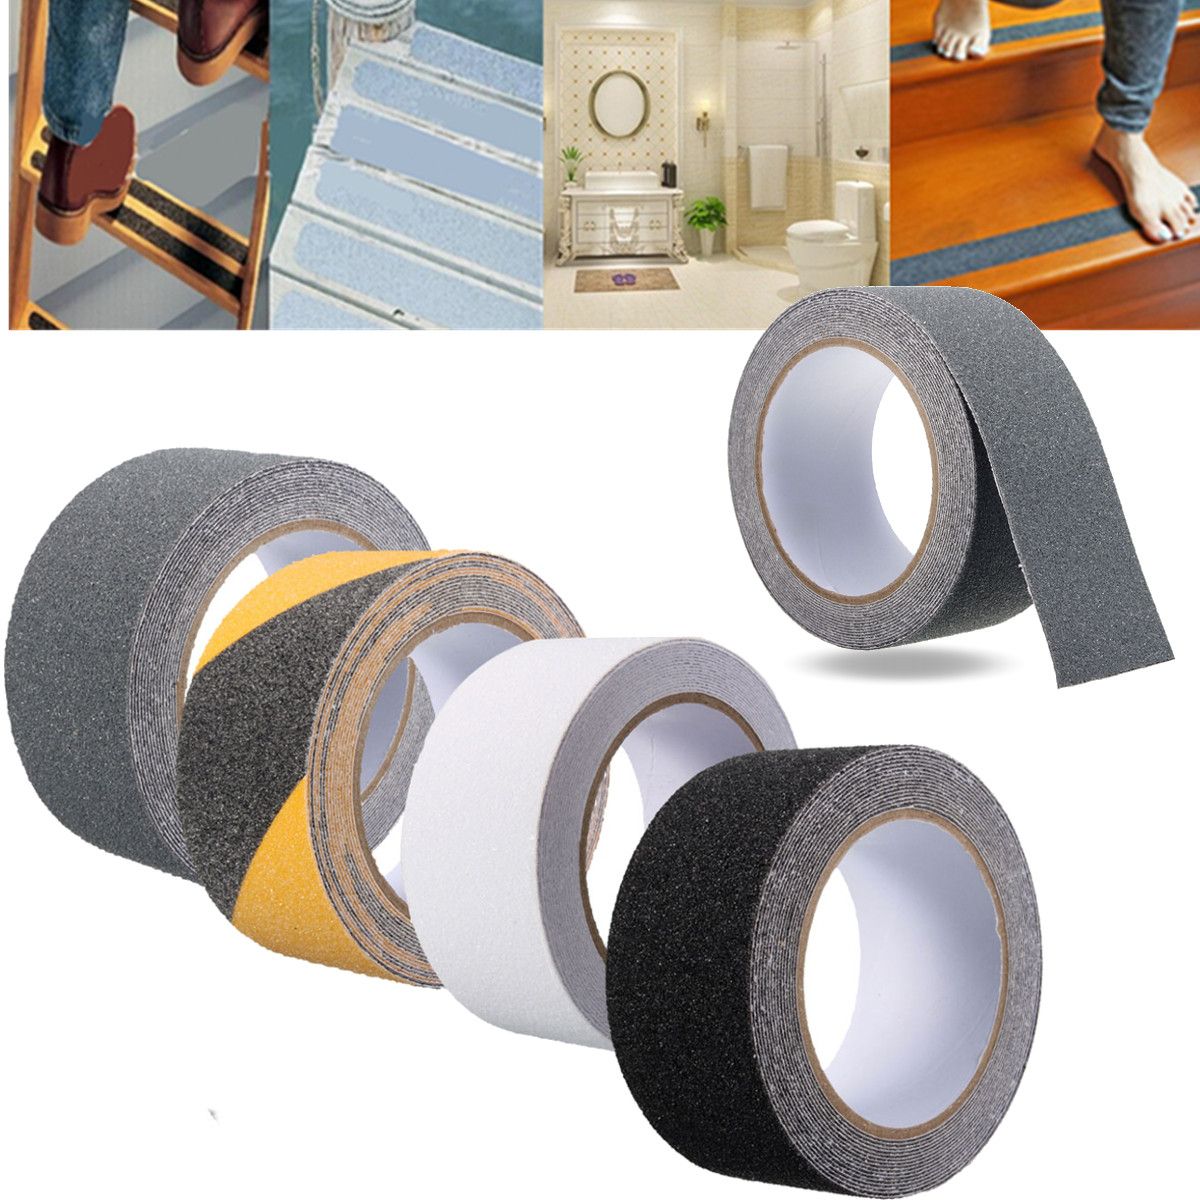 5CM-x-5M-Non-Slip-In-The-Dark-Tape-Anti-Slip-Adhesive-Grip-for-Stairs-and-Gaffers-165-Feet-Long-1382967